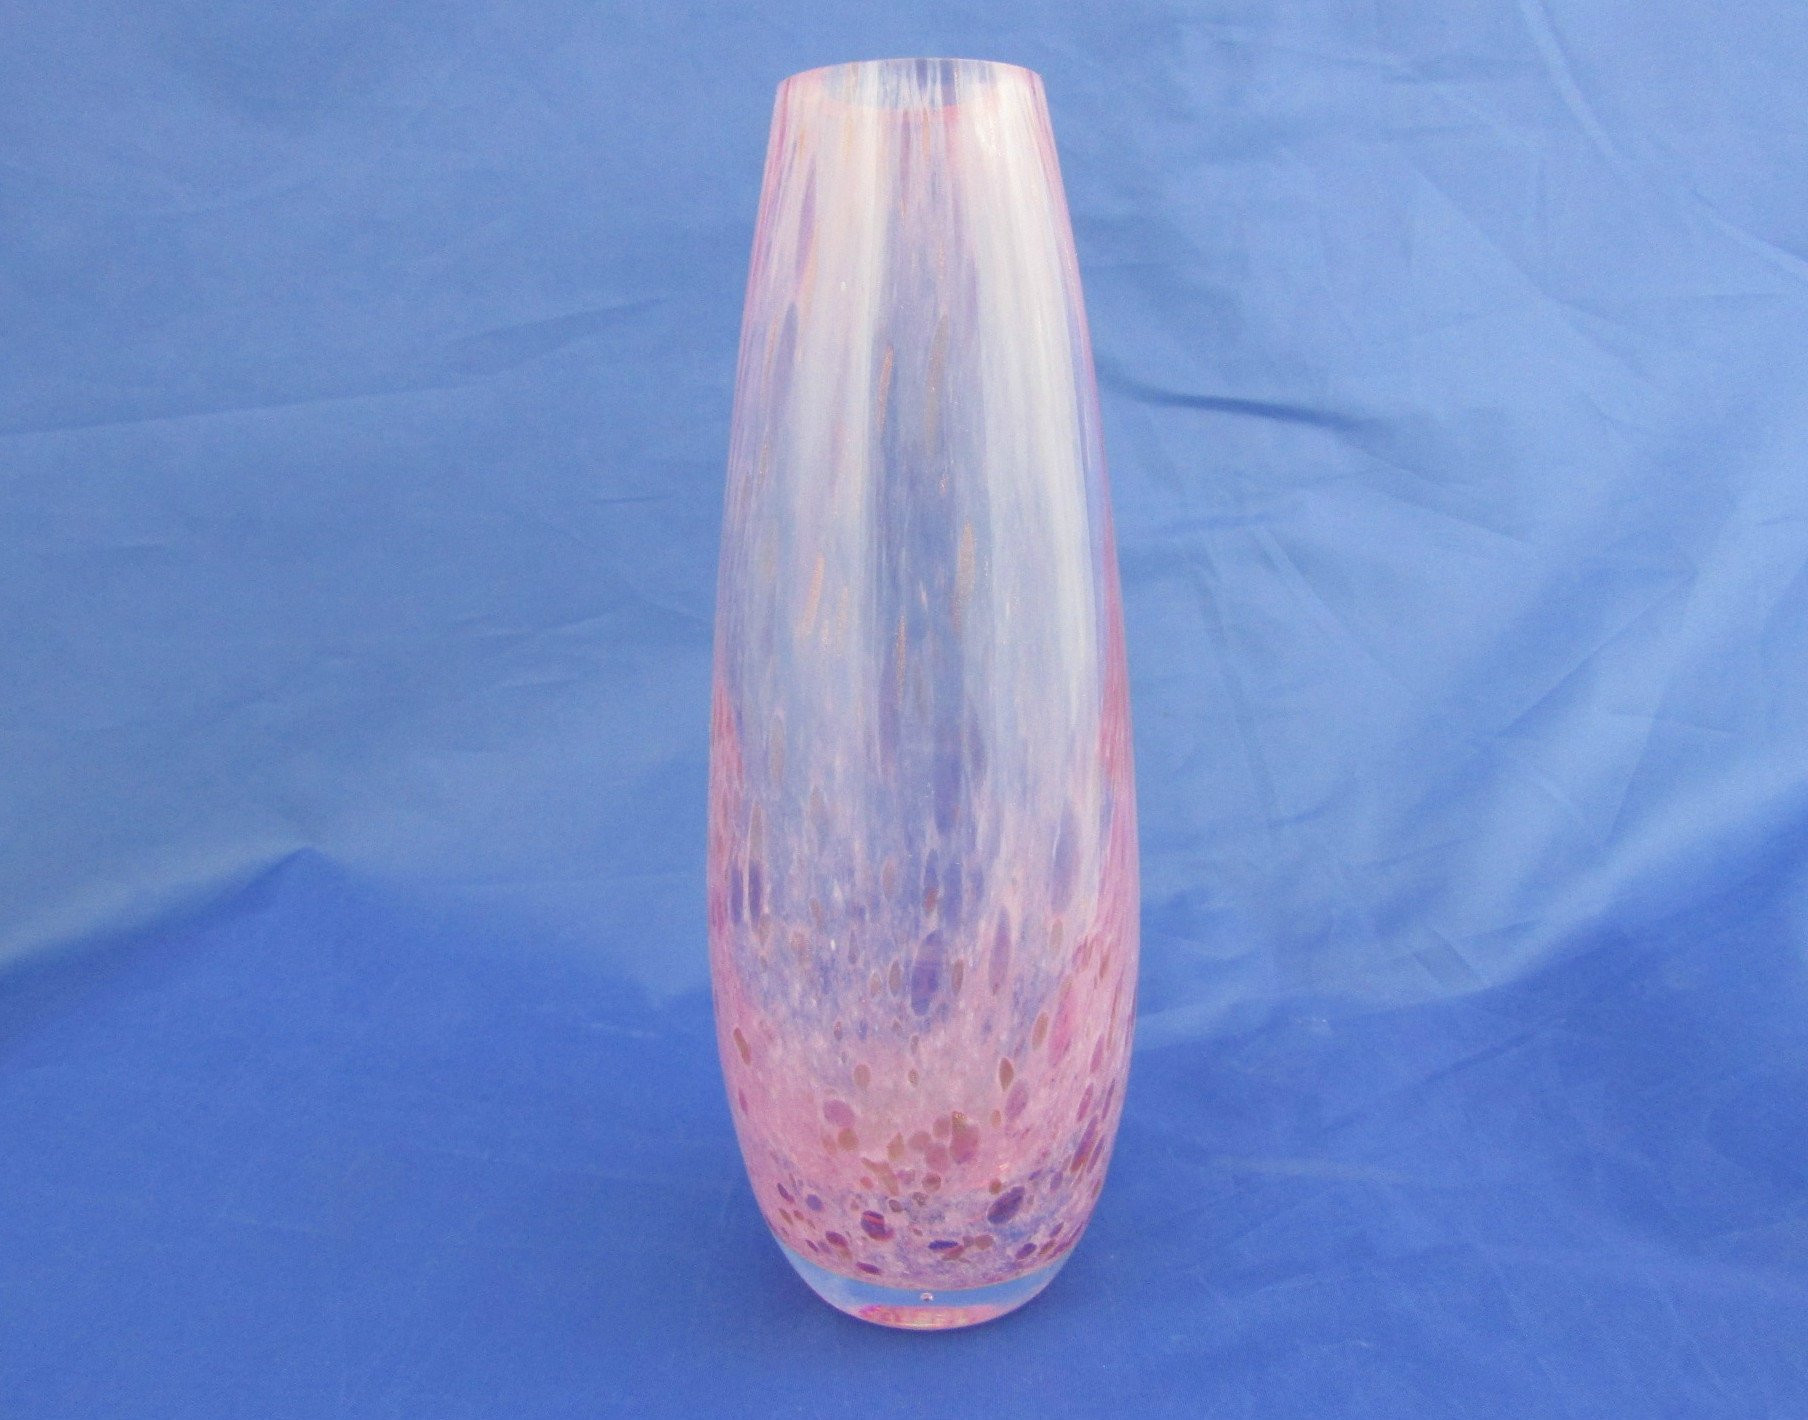 10 Lovely Amber Colored Glass Vases 2022 free download amber colored glass vases of caithness glass vase teardrop shaped vase pink spatter glass etsy within dc29fc294c28ezoom